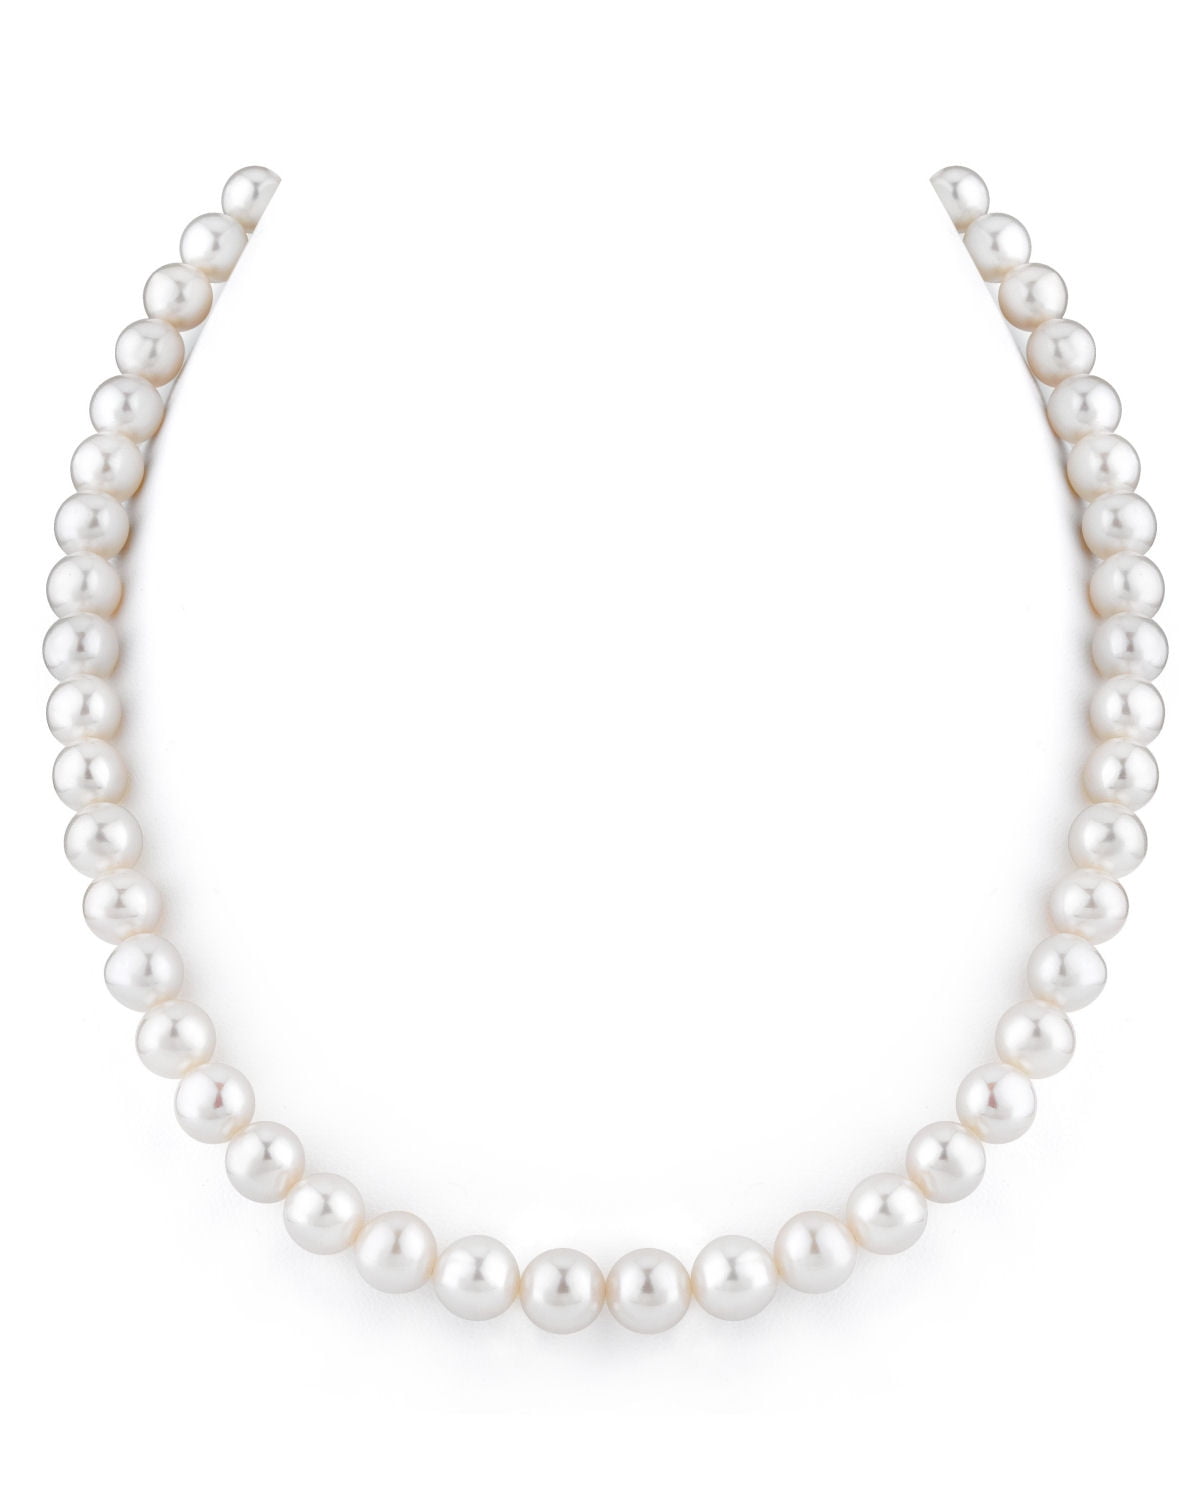 HOT 10-16MM Rare white BAROQUE CULTURED PEARL NECKLACE 18" AAA